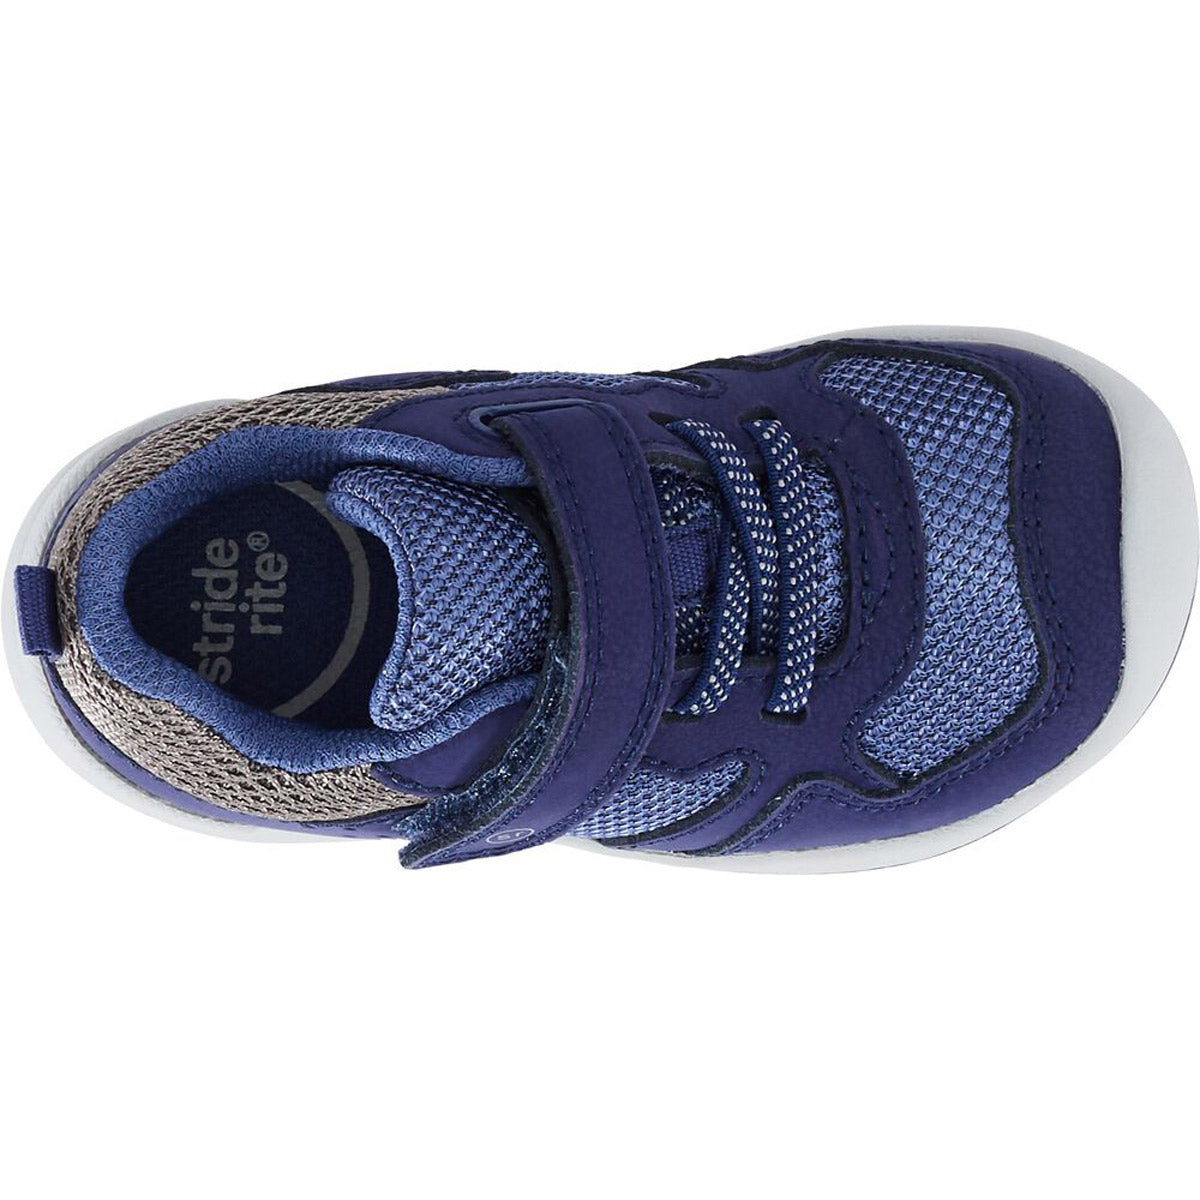 Top view of a single blue and grey Stride Rite Winslow Navy Sneaker with a velcro strap.